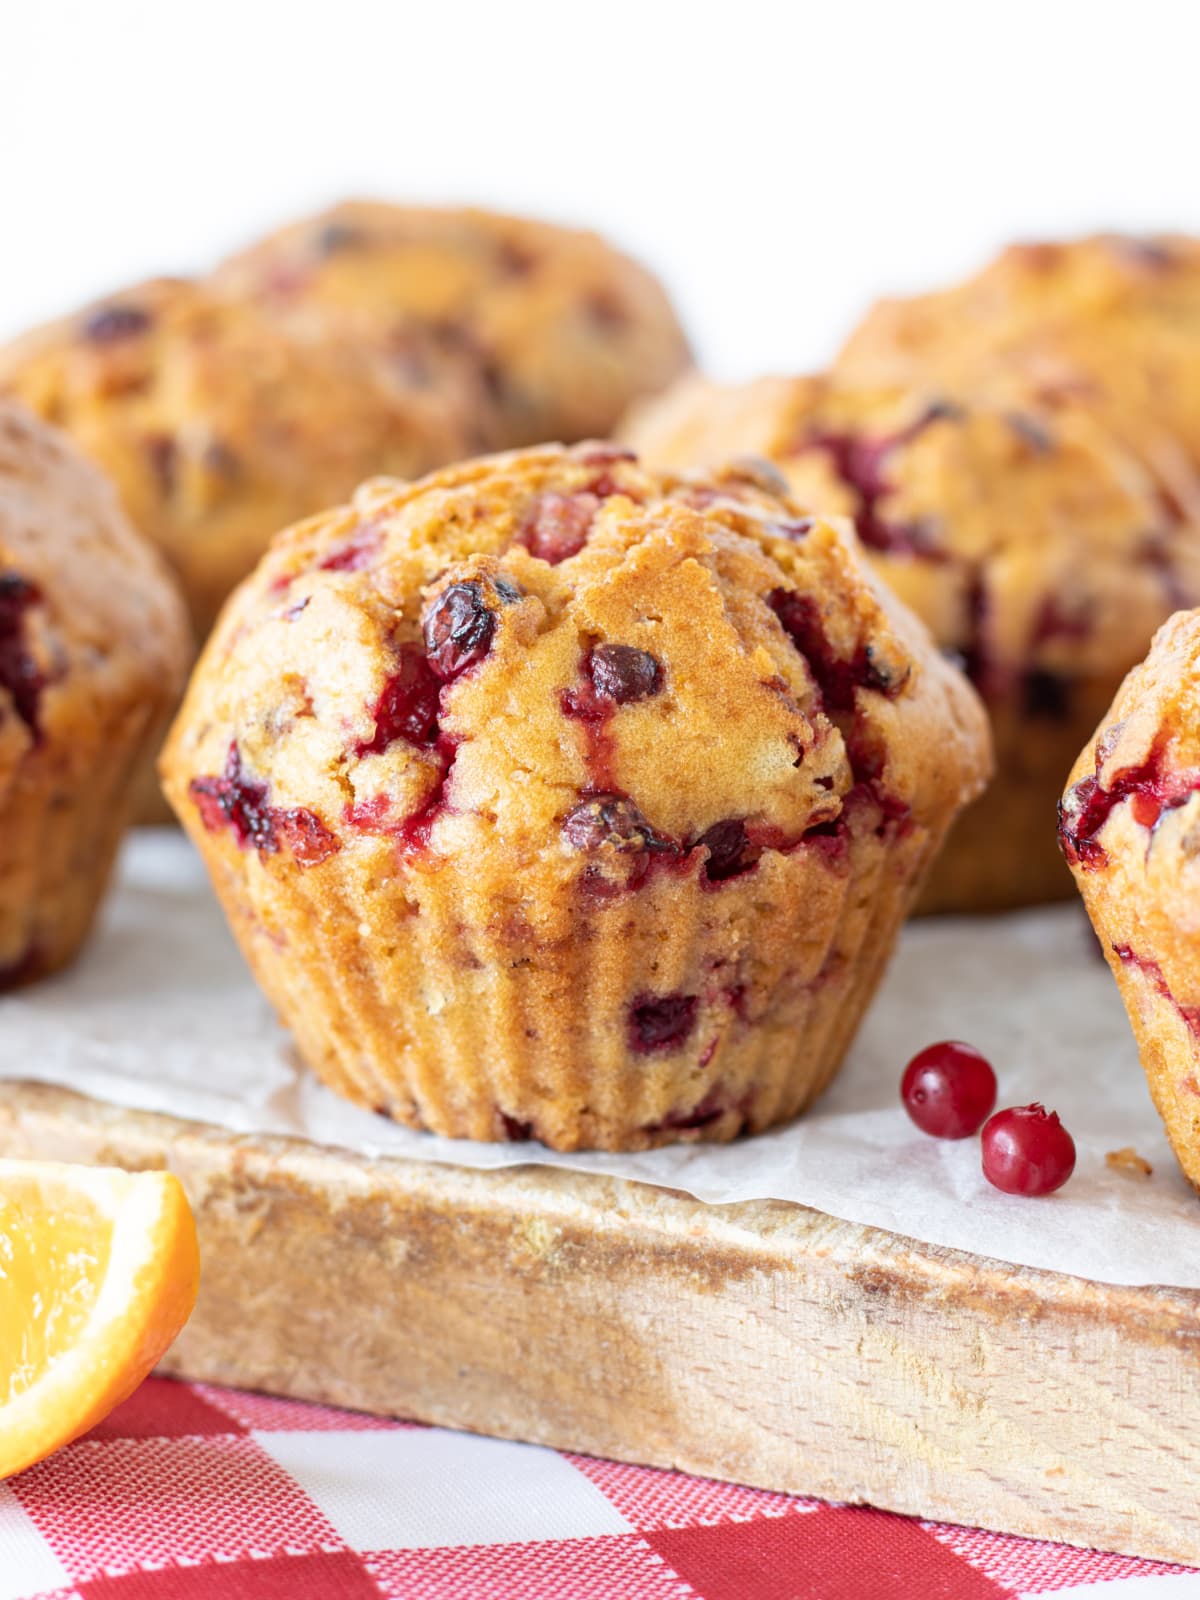 Cranberry orange muffin on a wooden table with white background. Vertical shot, a closeup. Freshly baked vegan muffins with cranberries and orange juice. Sweet vegan breakfast, dessert, or snack.